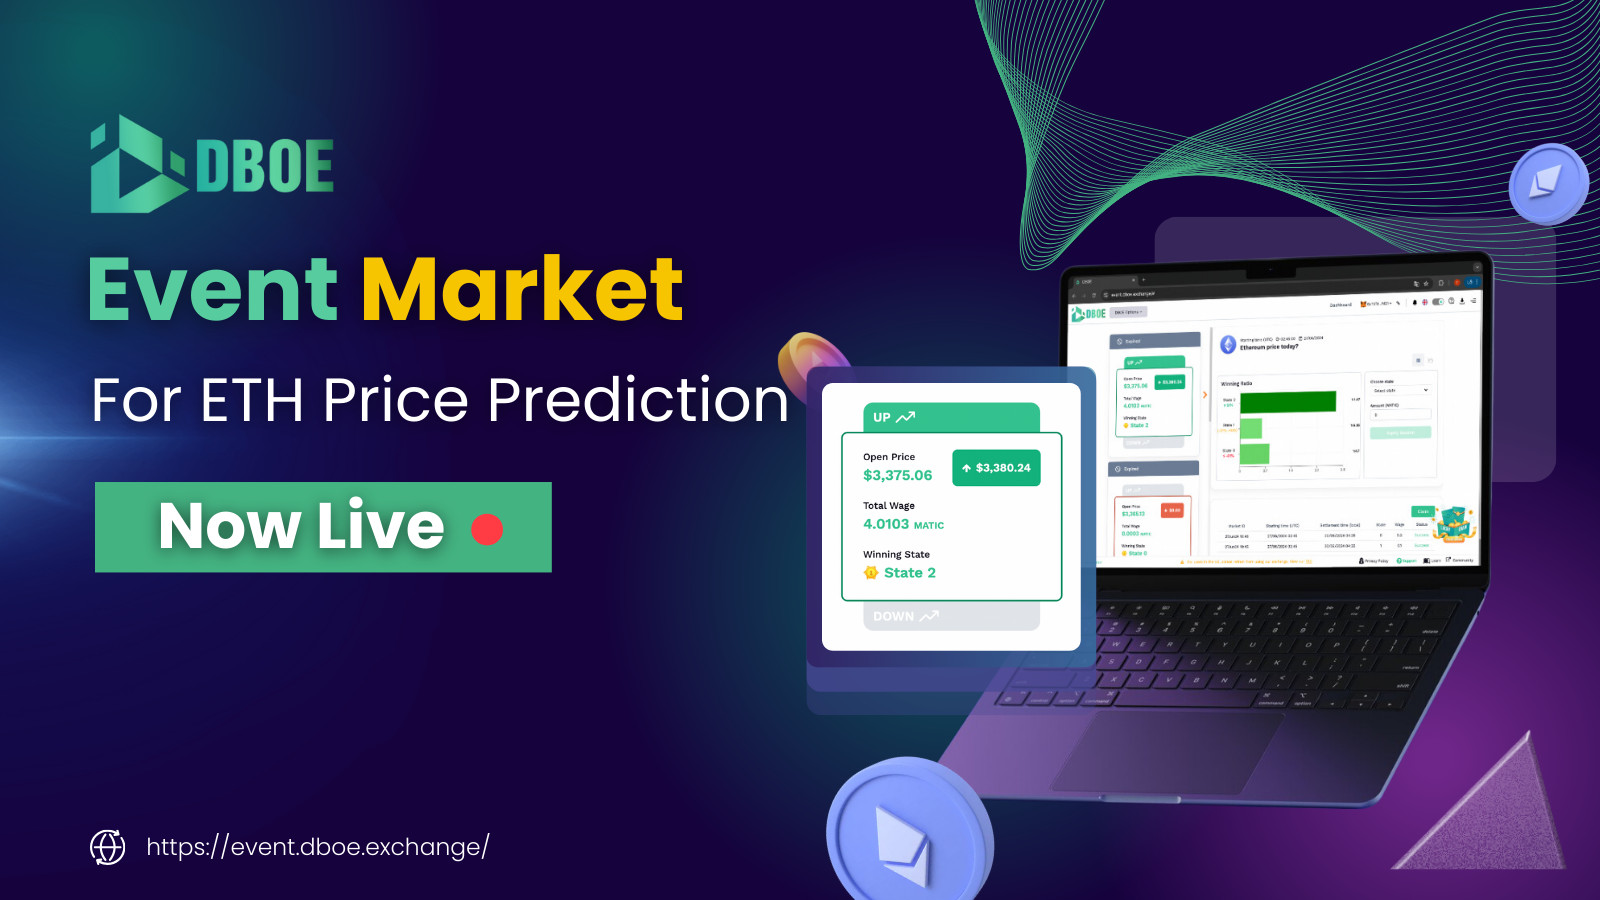 DBOE Event Market Go-Live with its Predictive Markets on Crypto Prices